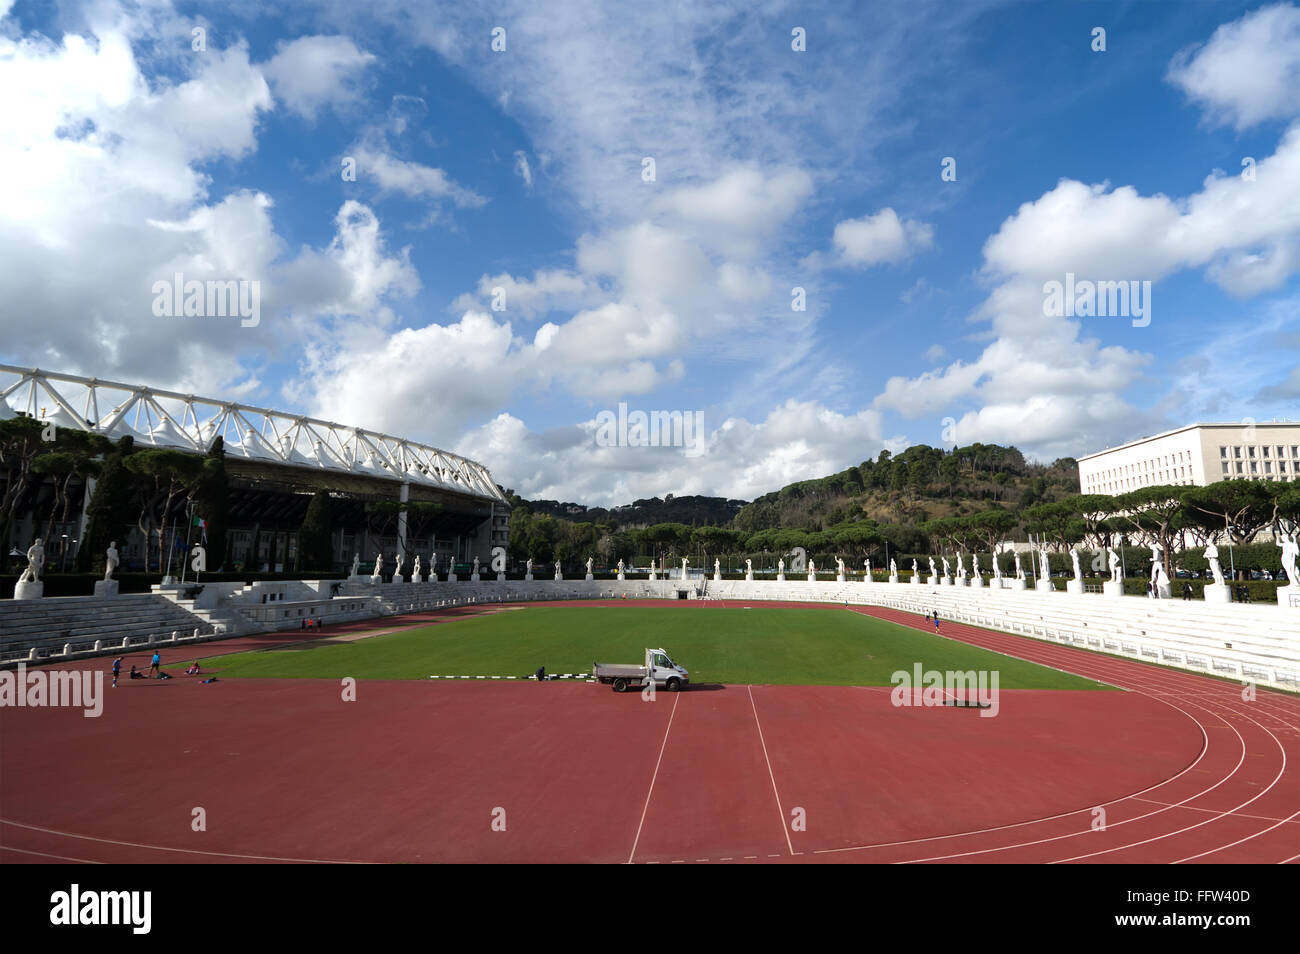 ROME, ITALY - FEBRUARY 9, 2016: people in the Stadio dei Marmi , Stadium of the Marbles in the Foro Italico designed in the 1920 Stock Photo